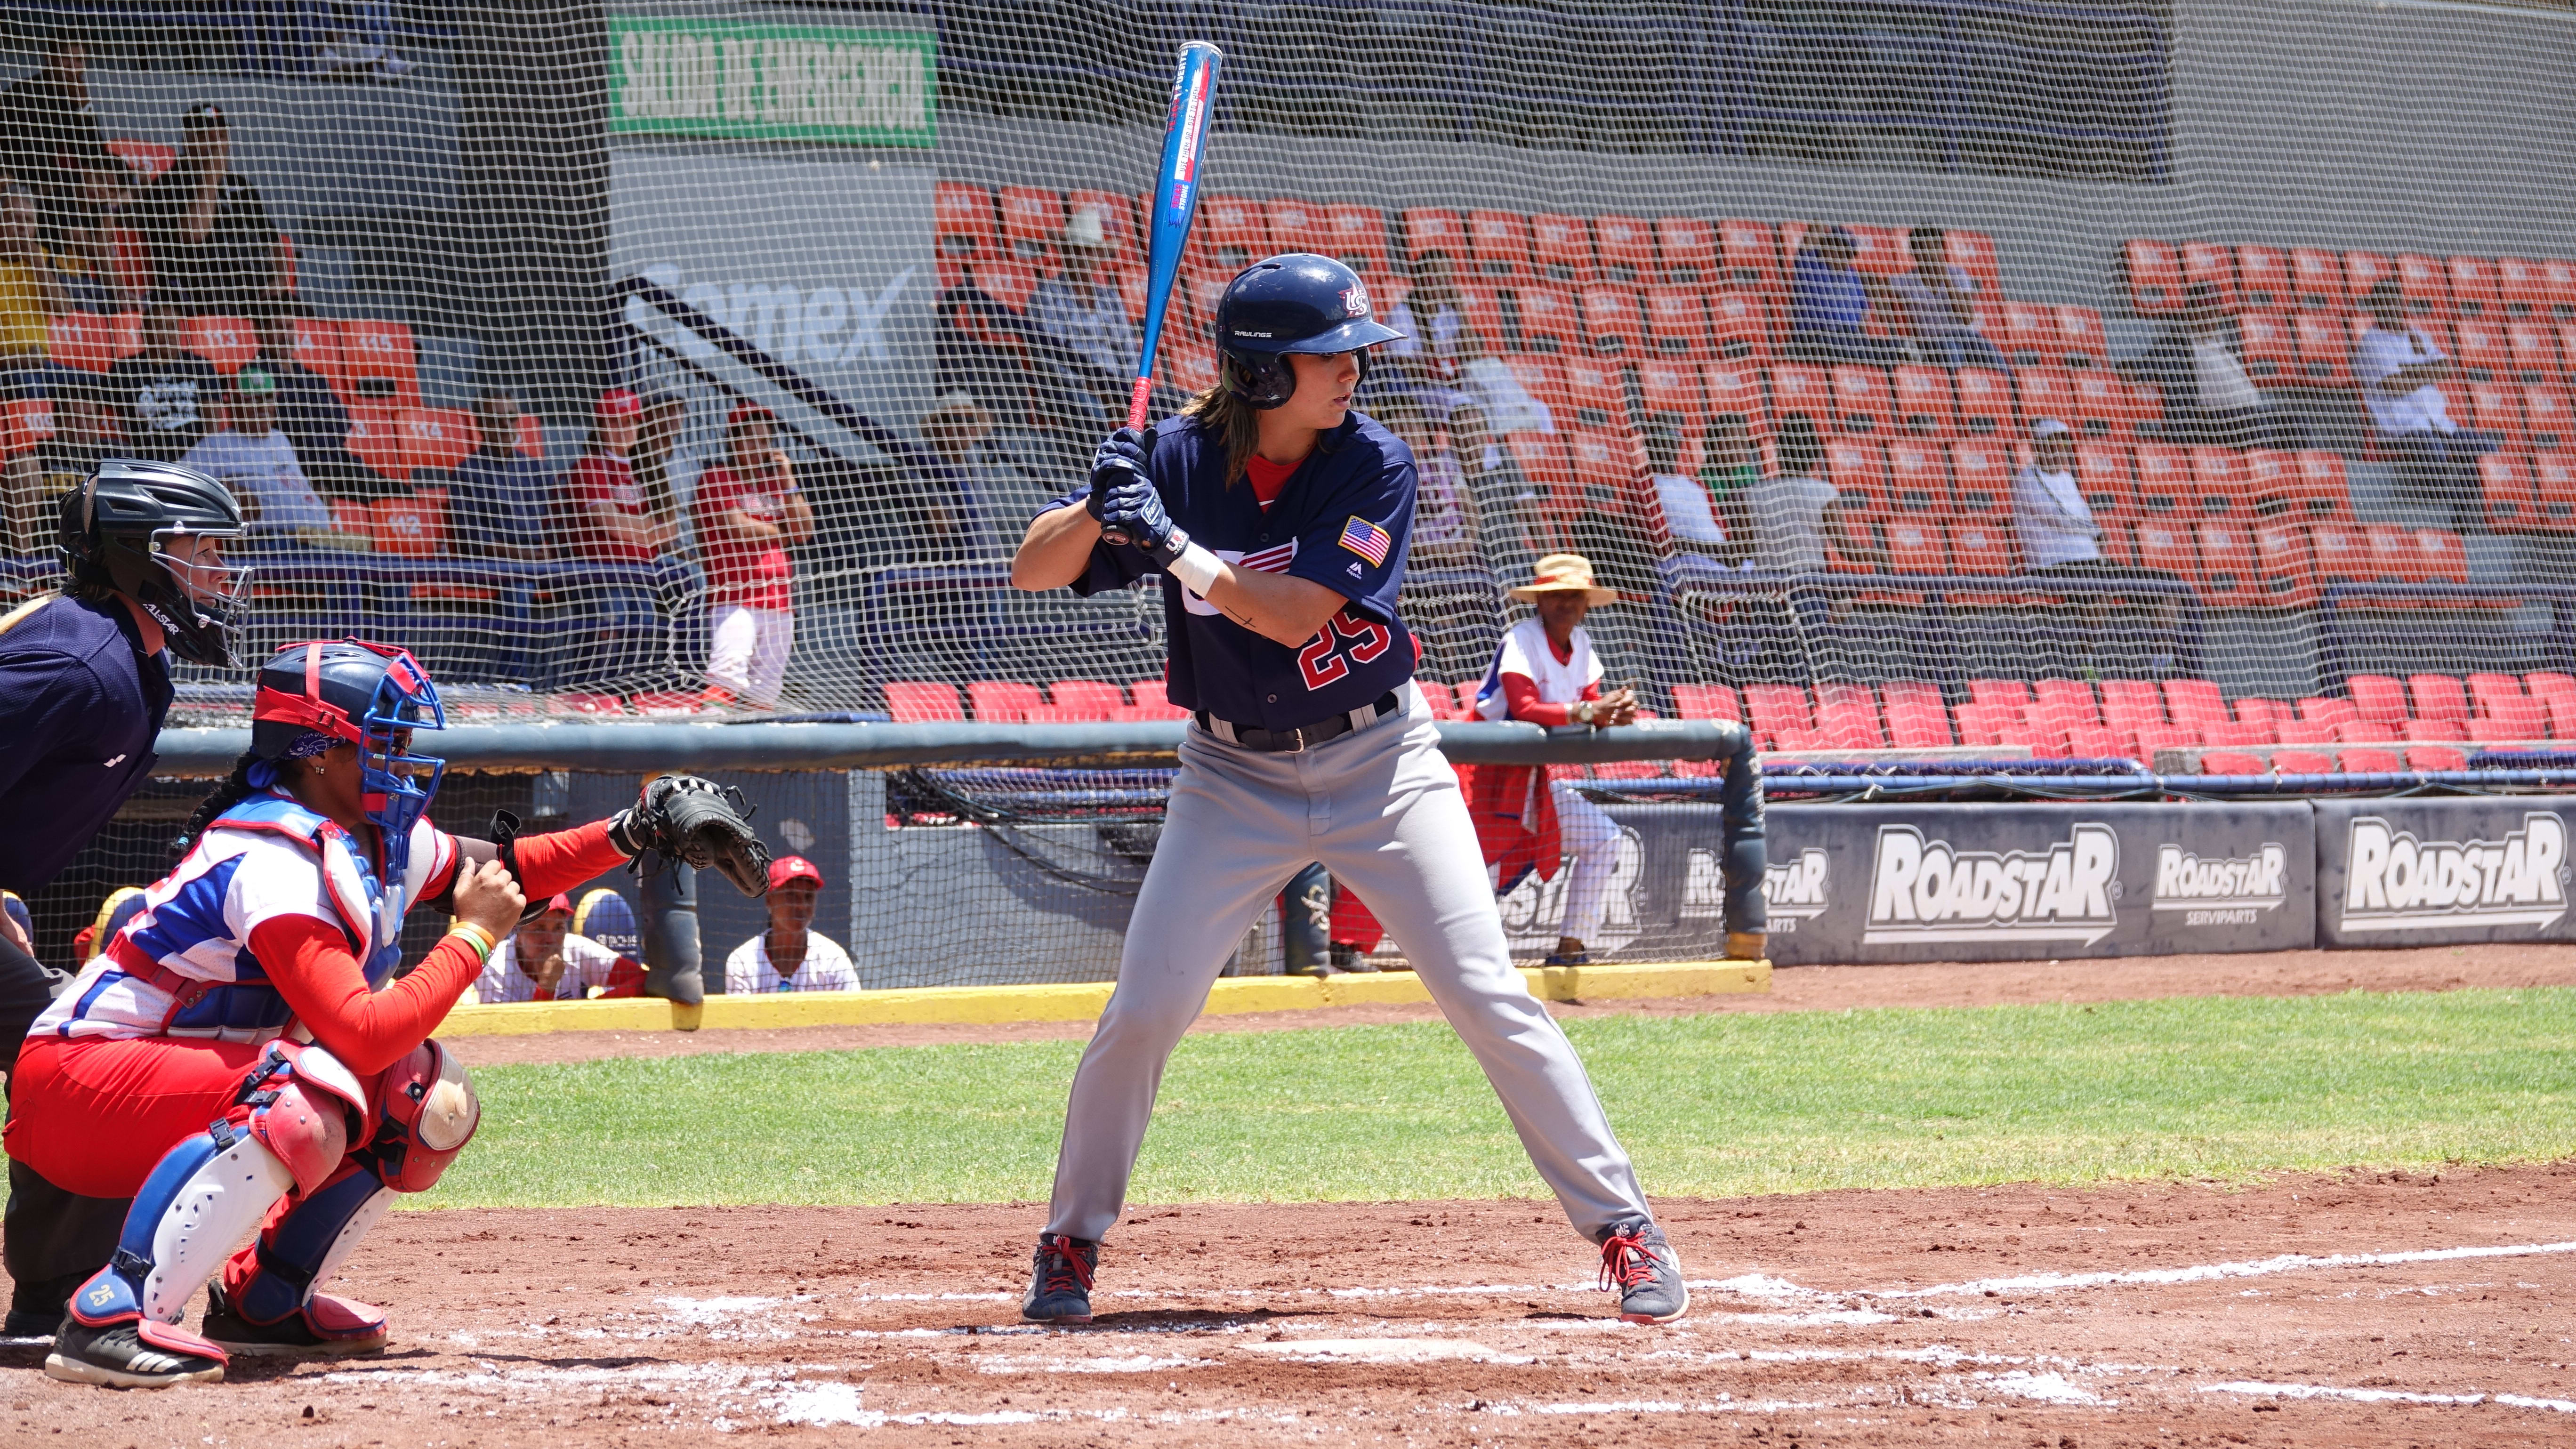 Lansdell's Cycle Leads Team USA in Win Over Cuba | USA Baseball